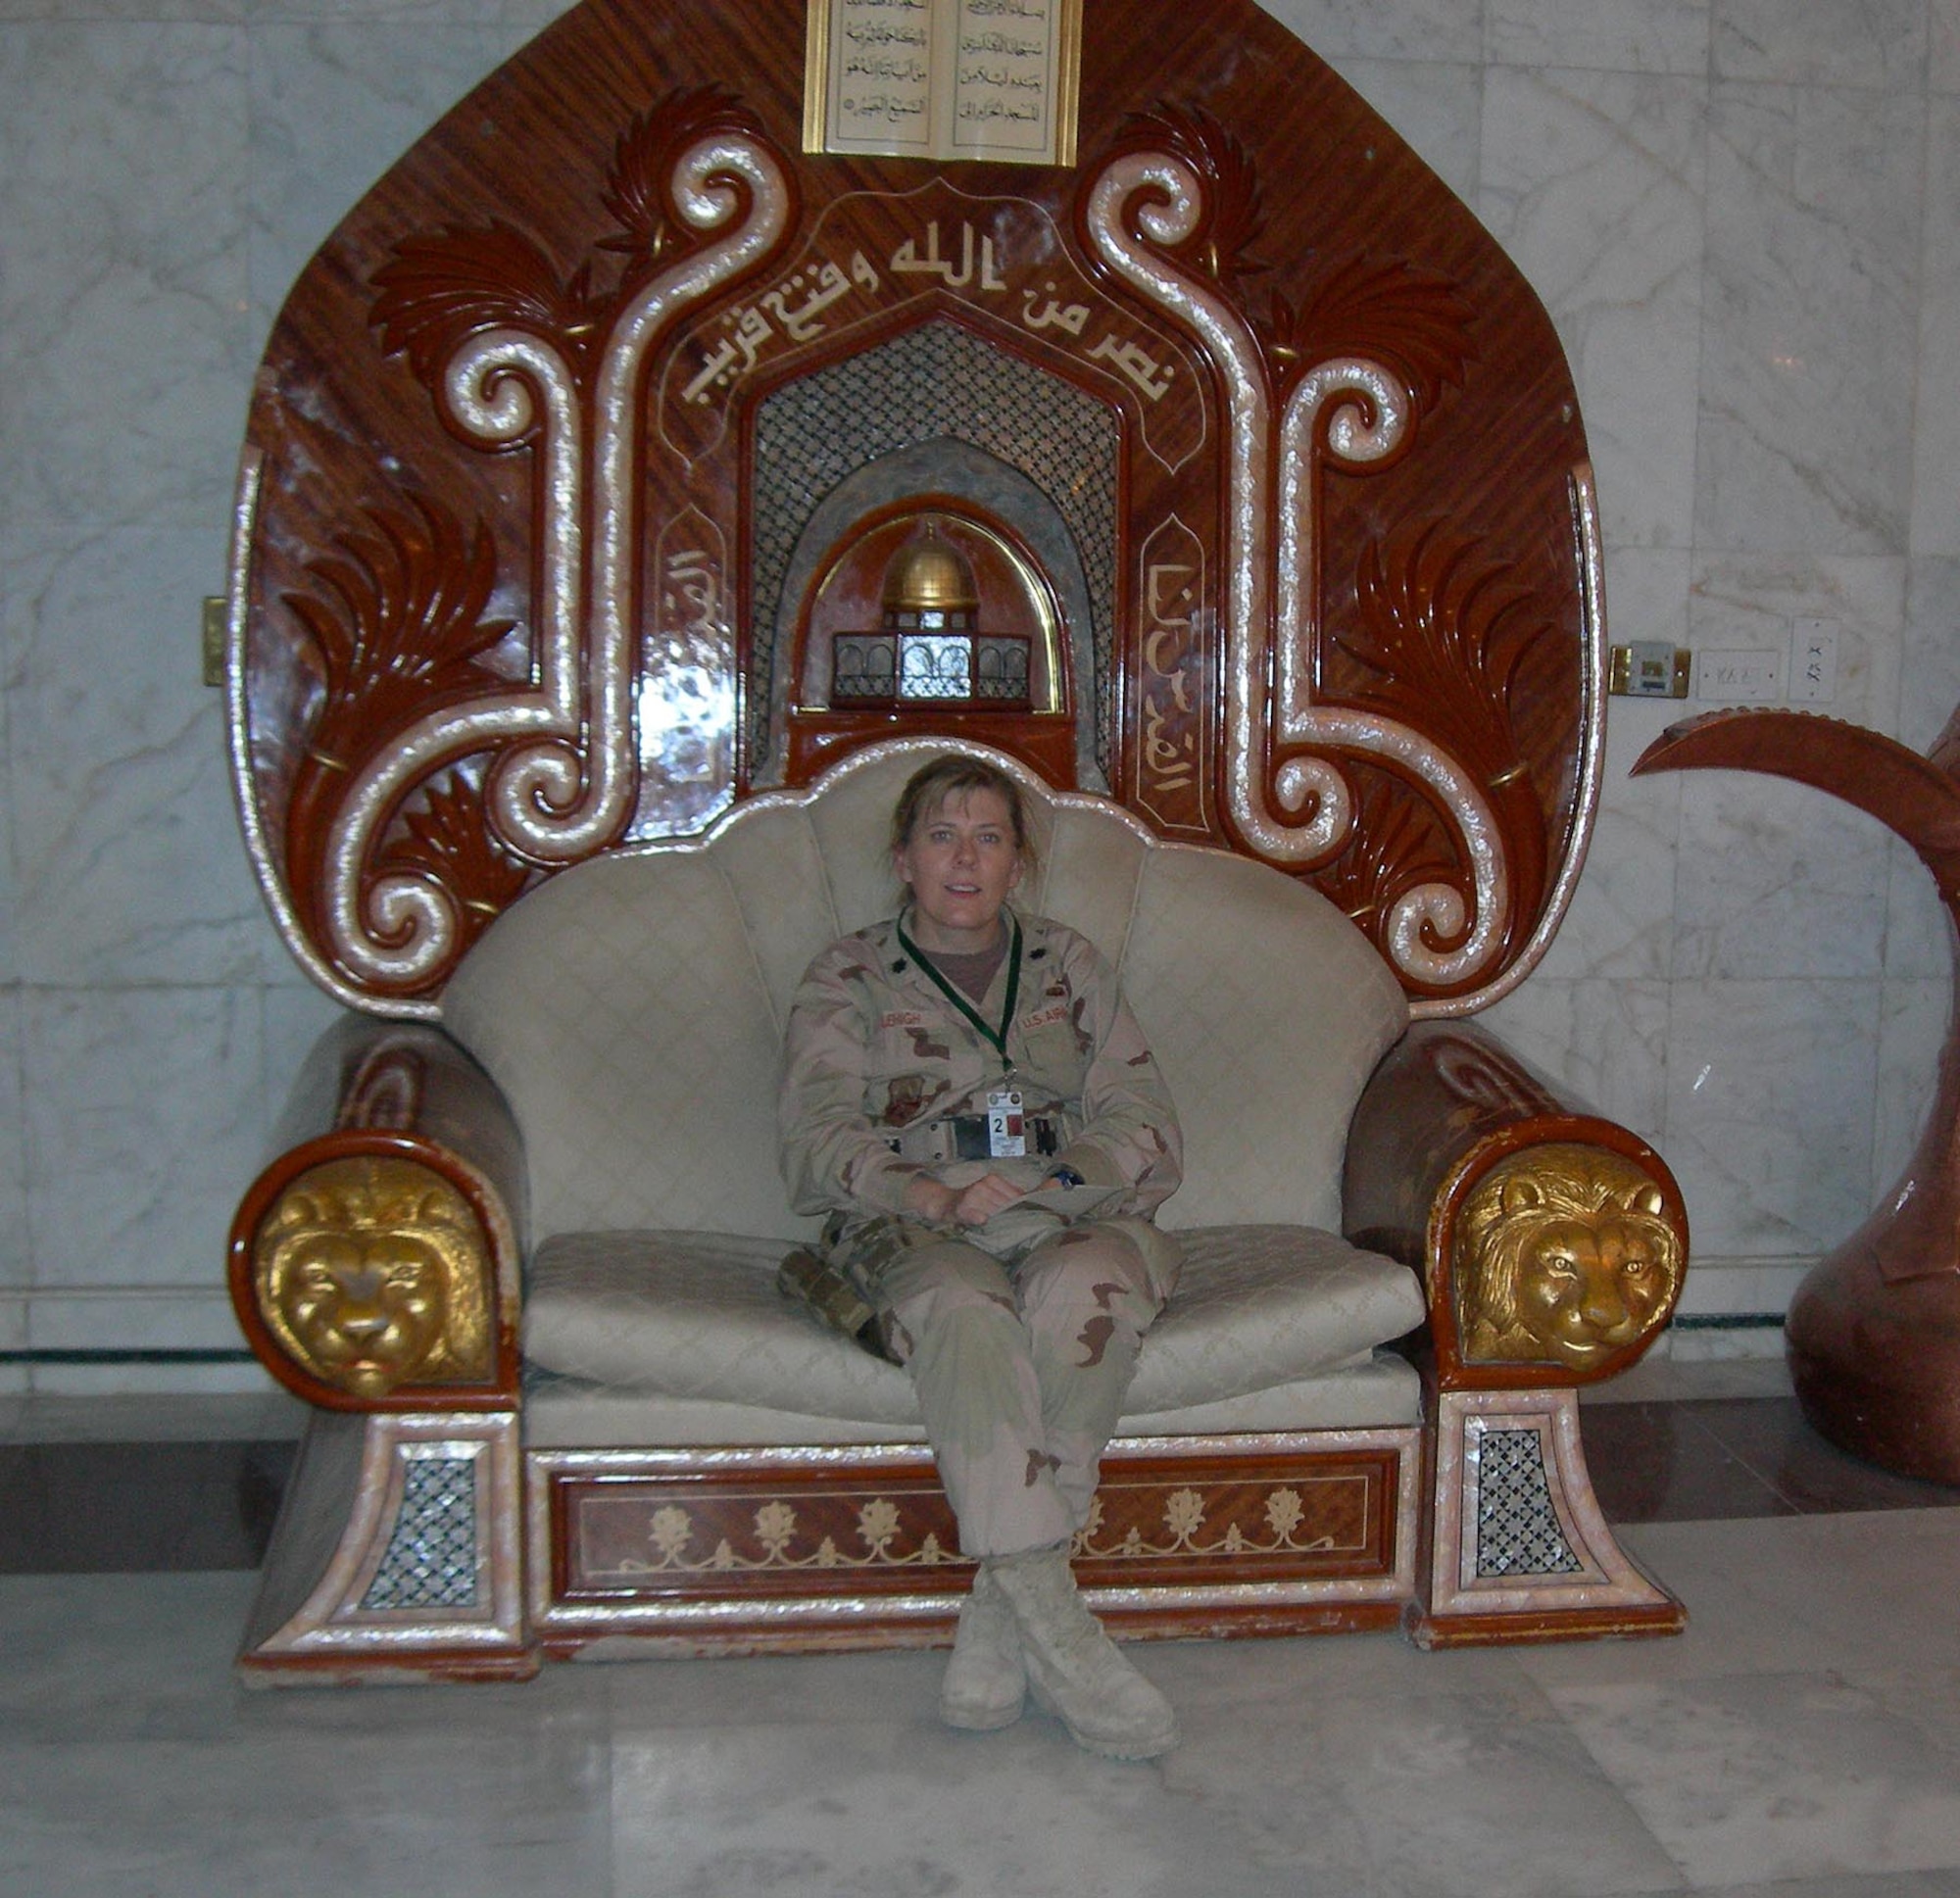 Lt. Col. Deann Lehigh sits in the throne of one of Saddam Hussein's former palaces while on duty in Iraq.